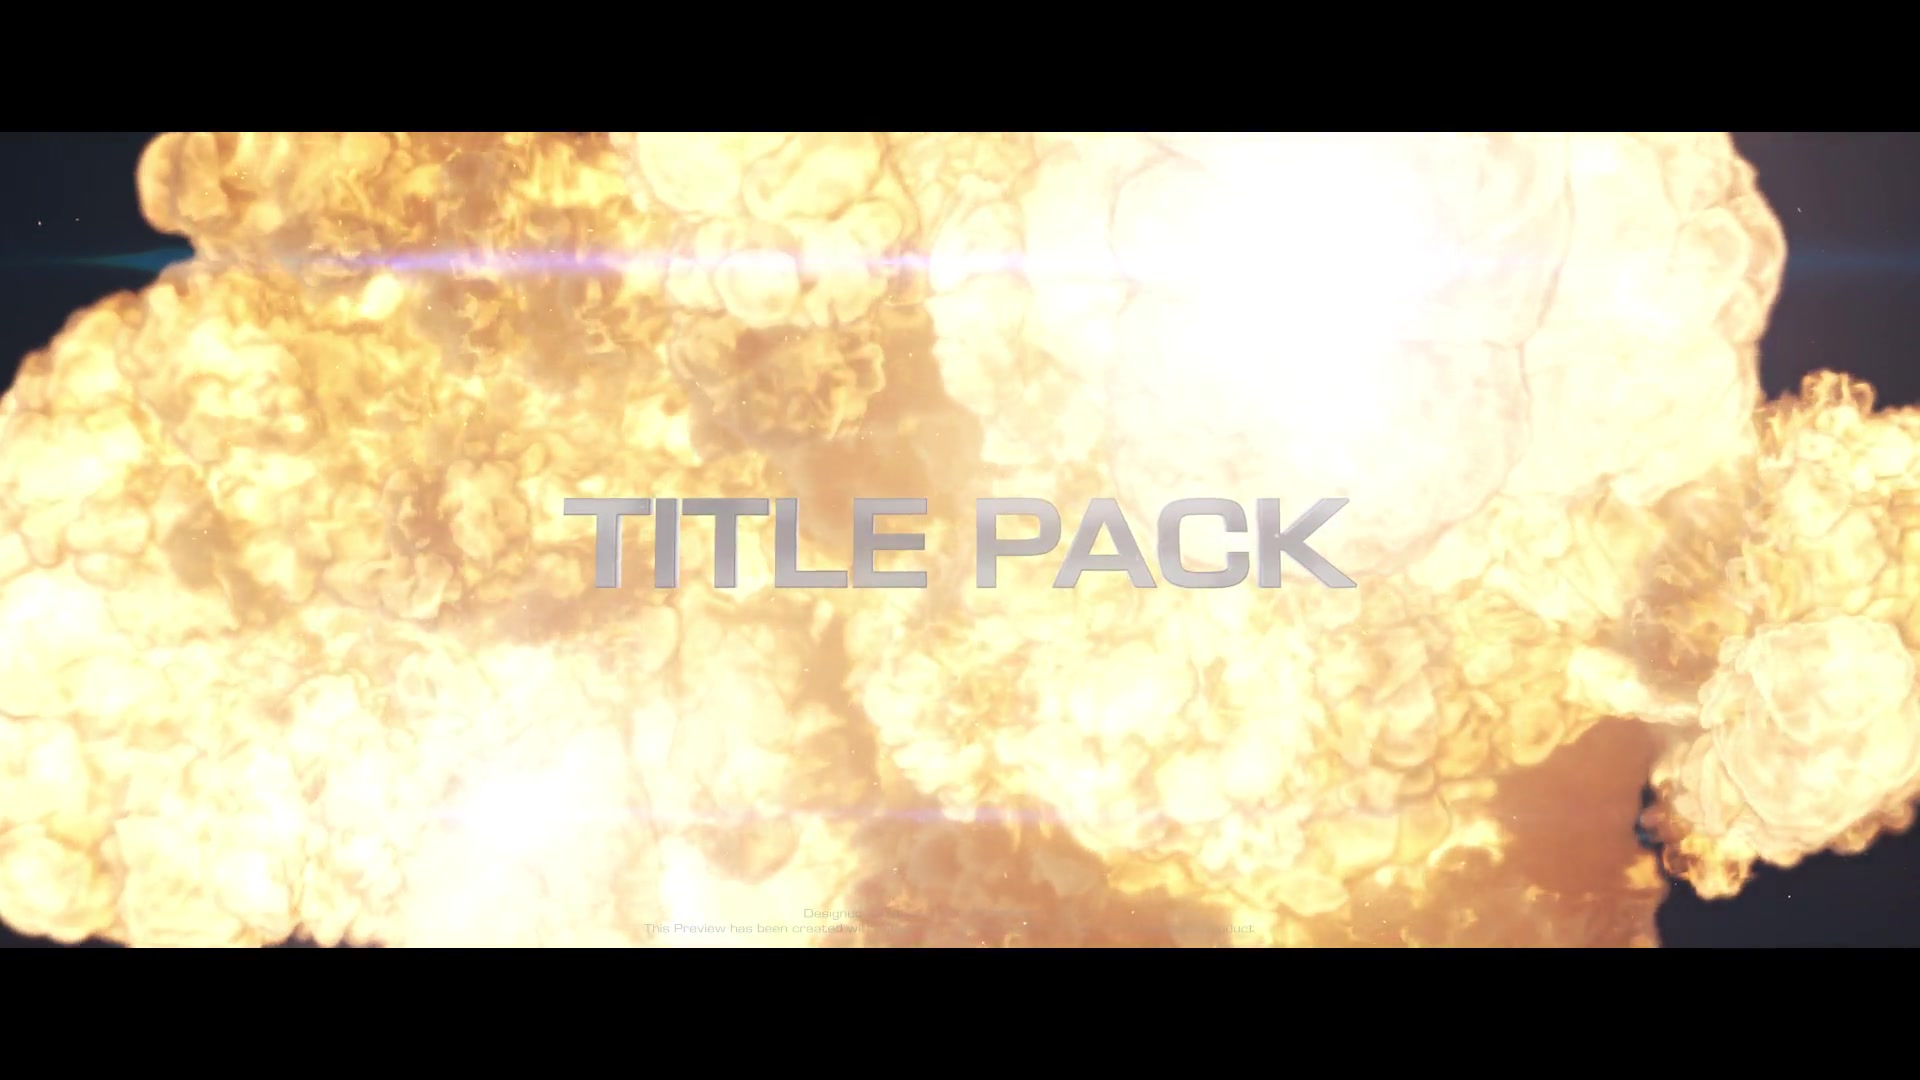 Blockbuster Title Pack: Explosions - Download Videohive 22352530